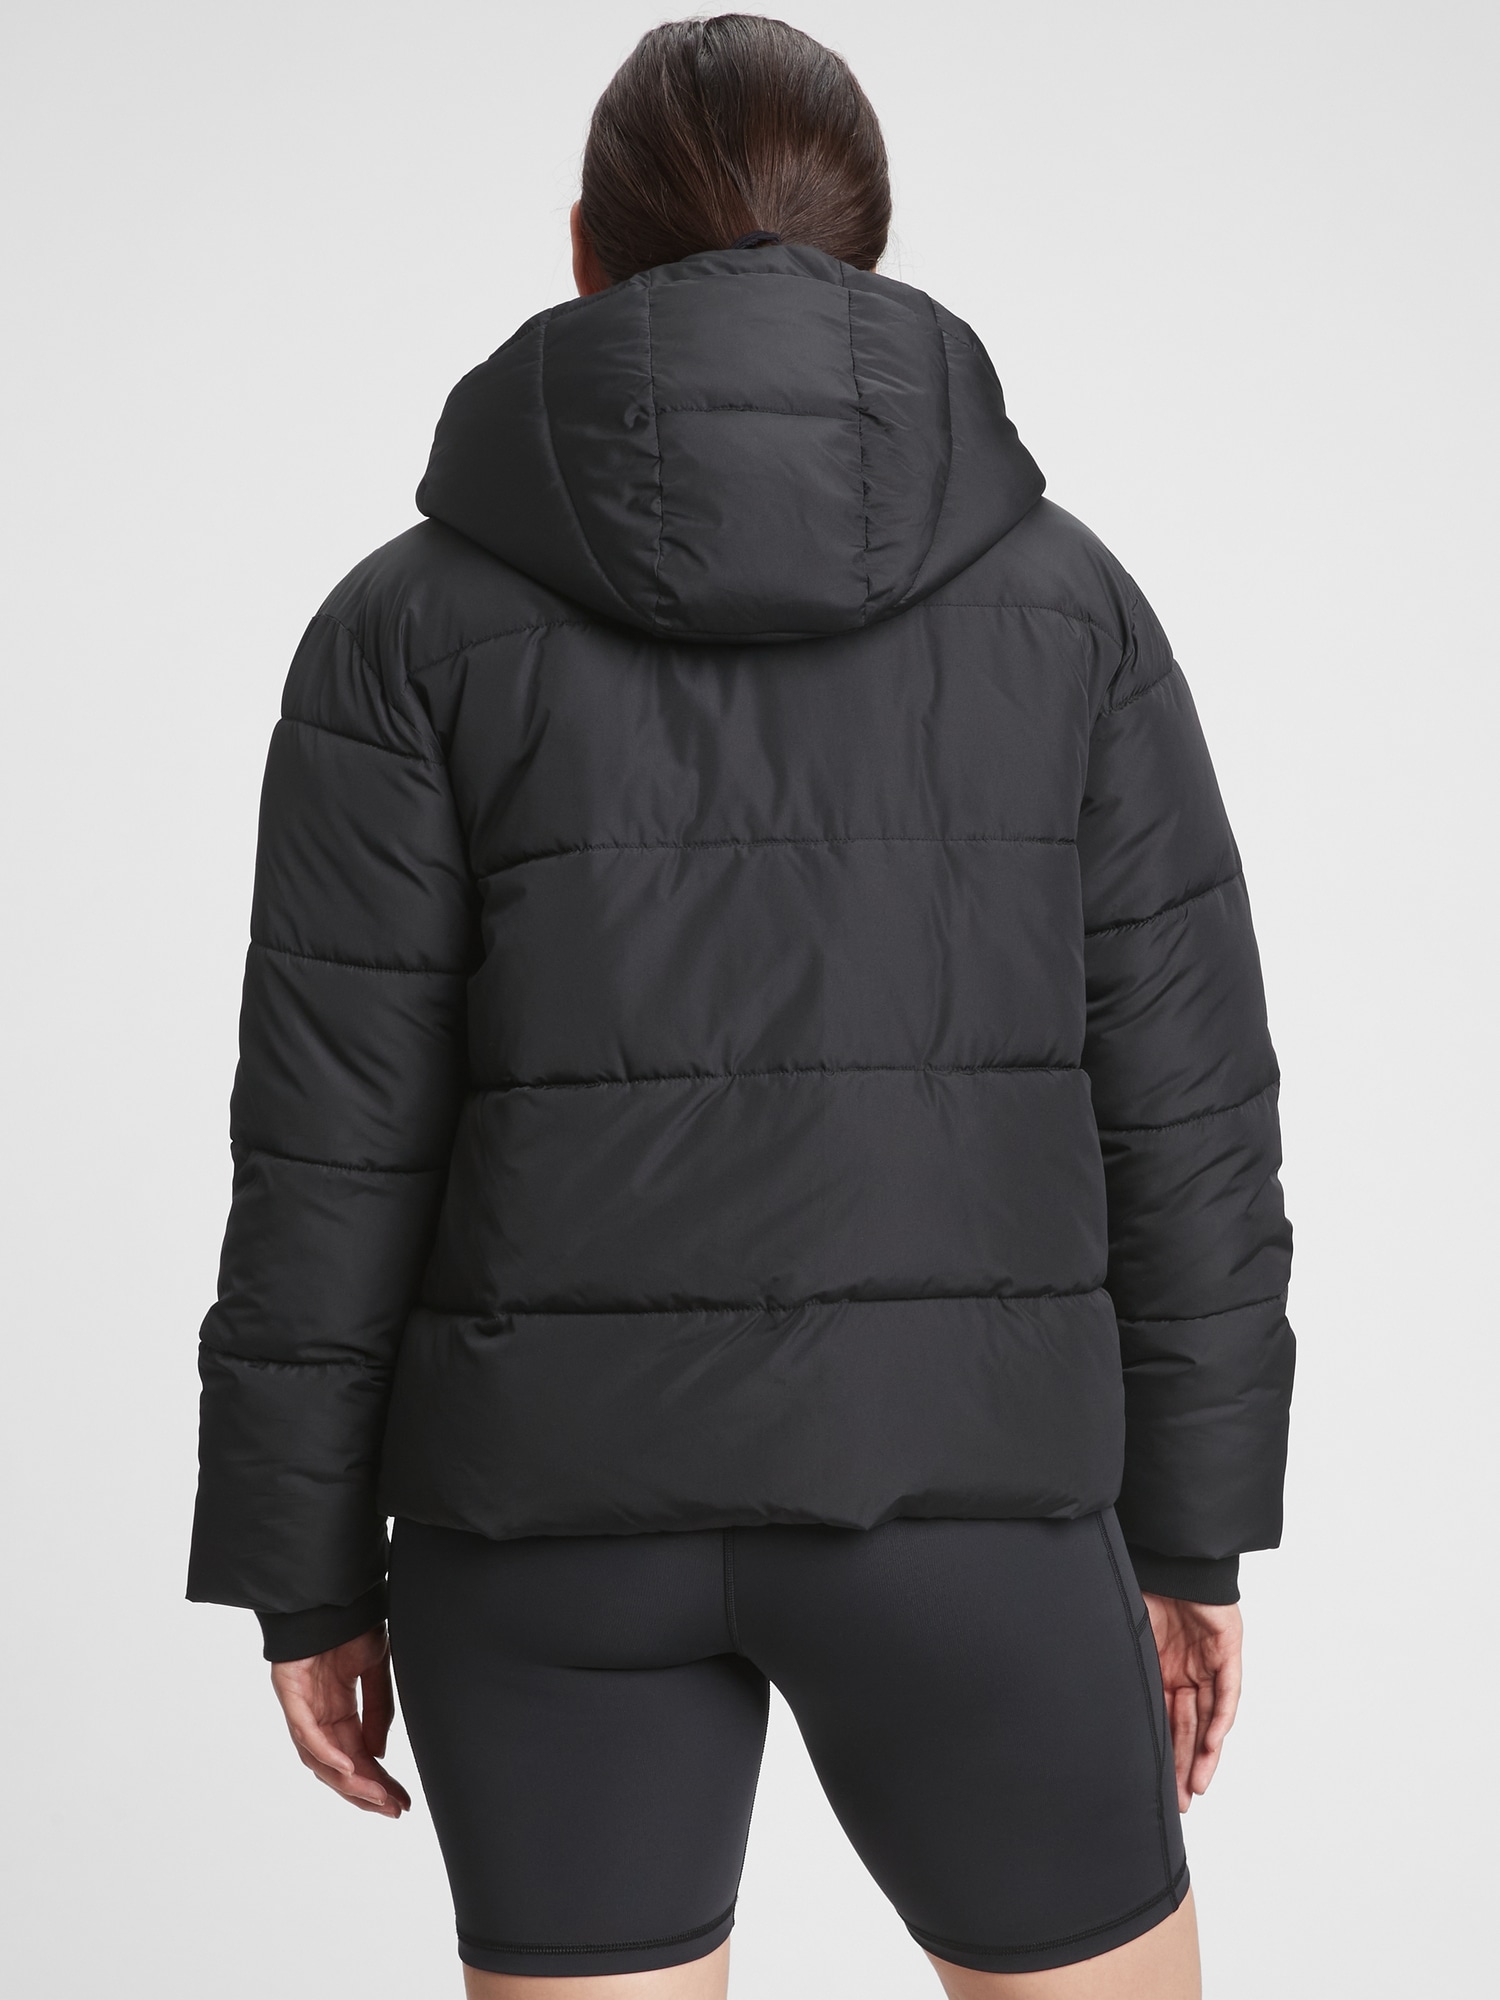 ColdControl Max Shorty Puffer Jacket | Gap Factory